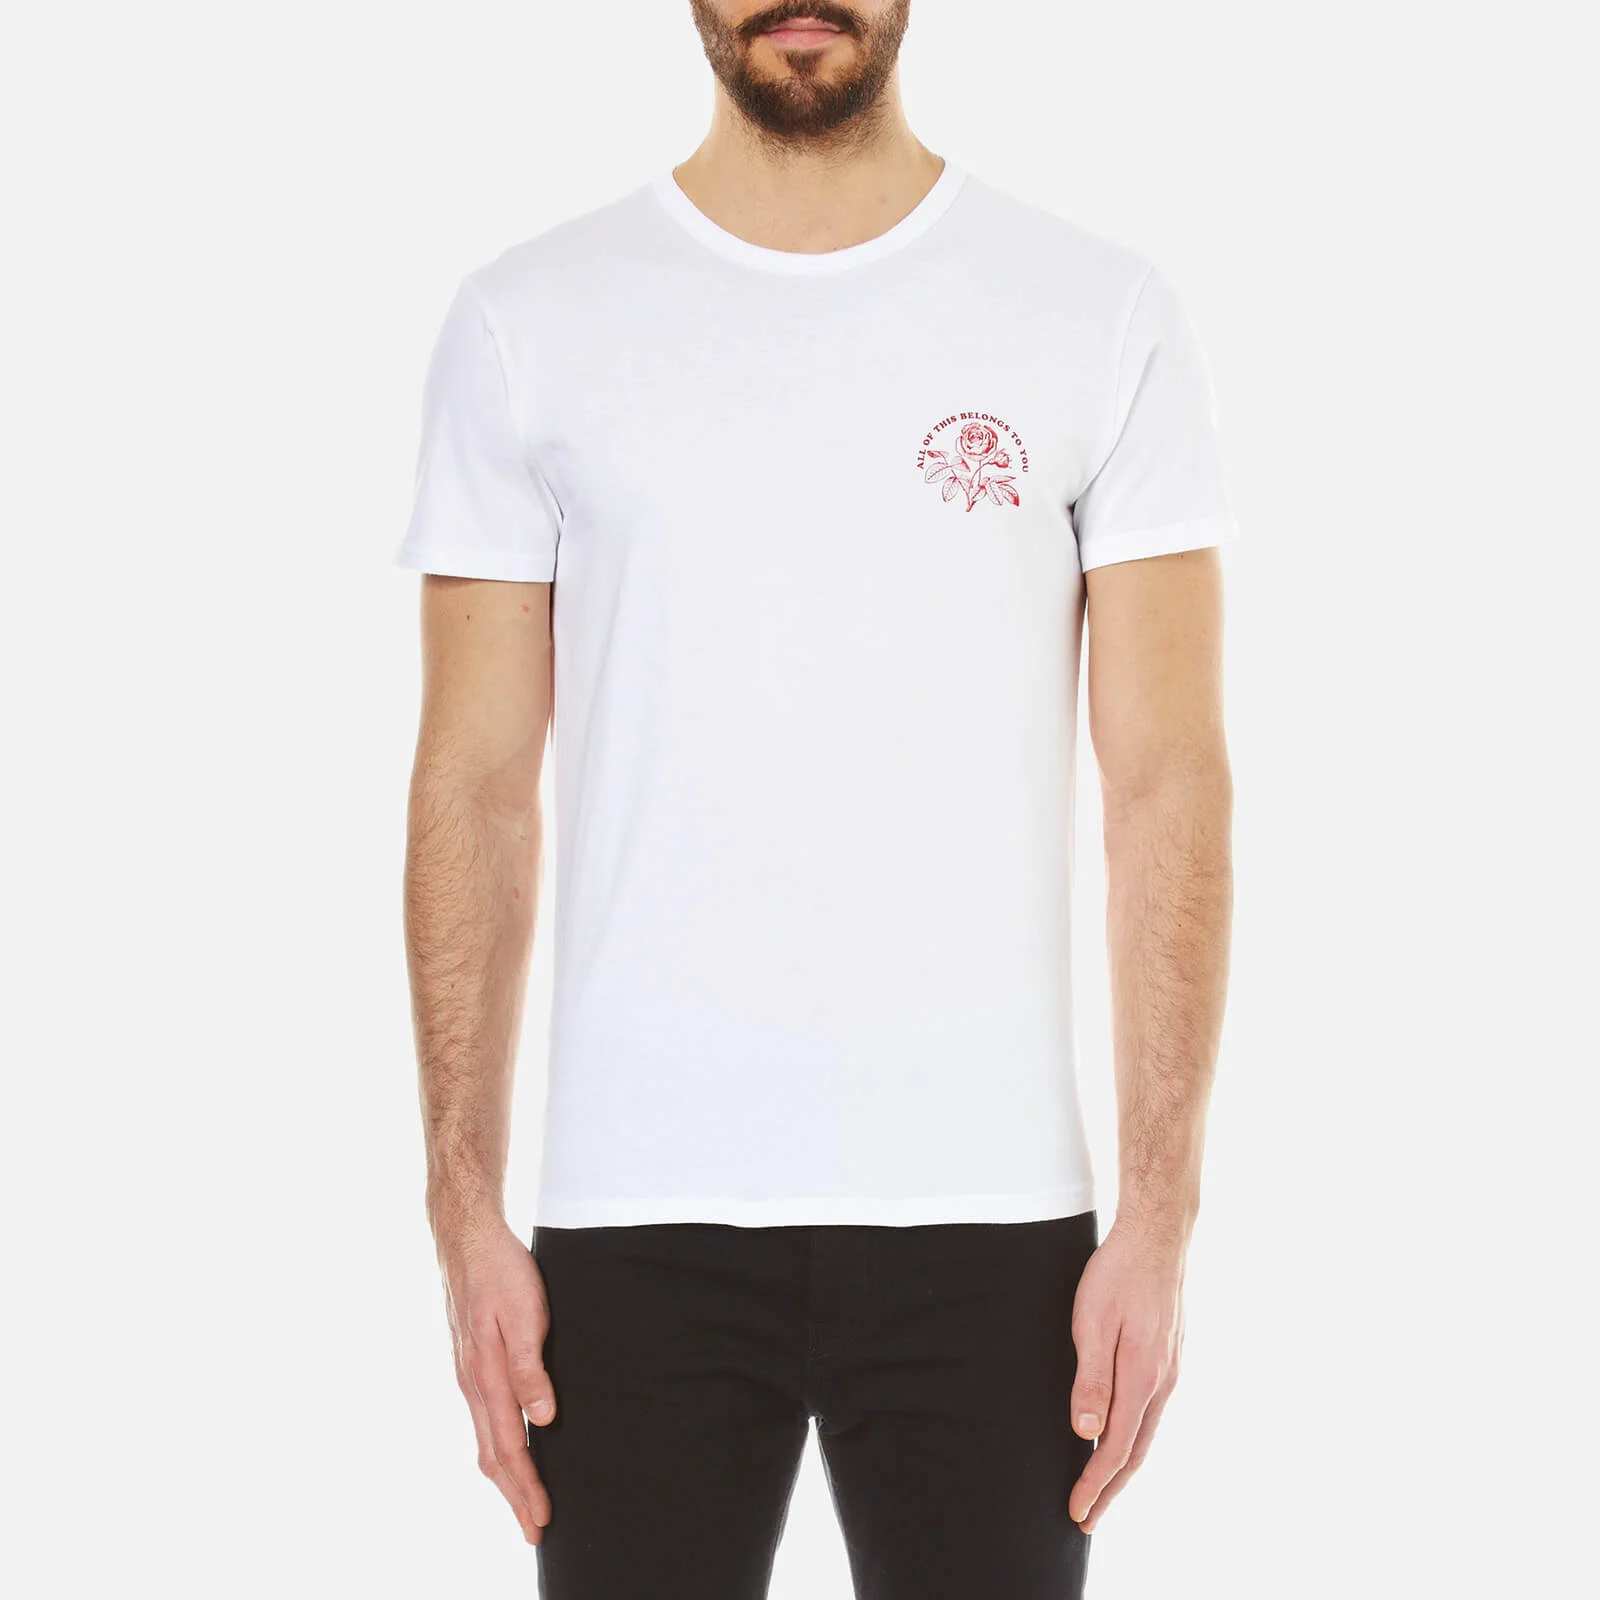 Edwin Men's All of This T-Shirt - White Image 1